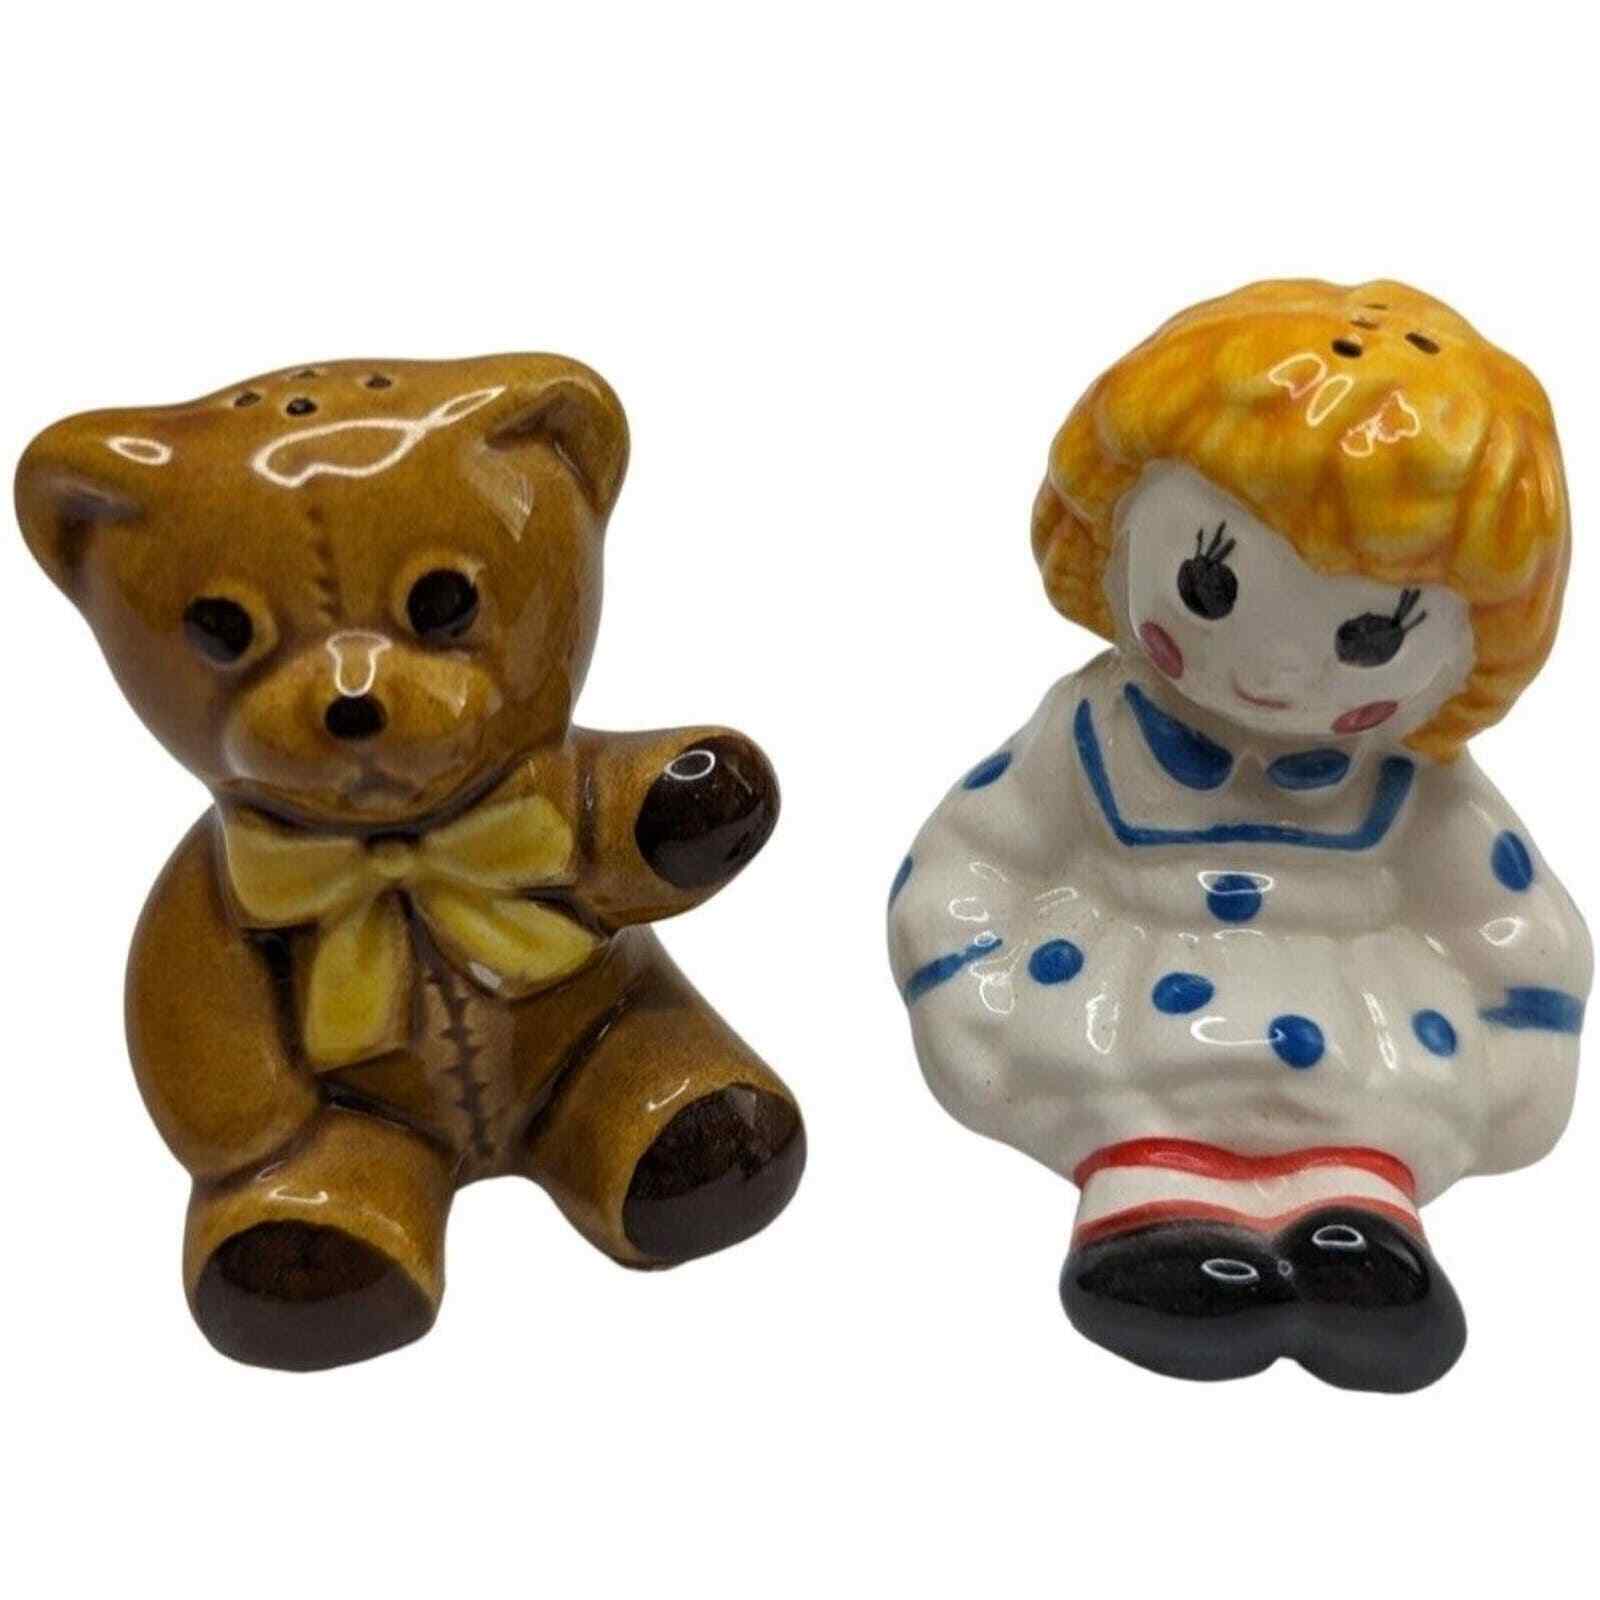 Vintage Salt and Pepper Shaker Set Avon Hand painted Doll and Bear Toys